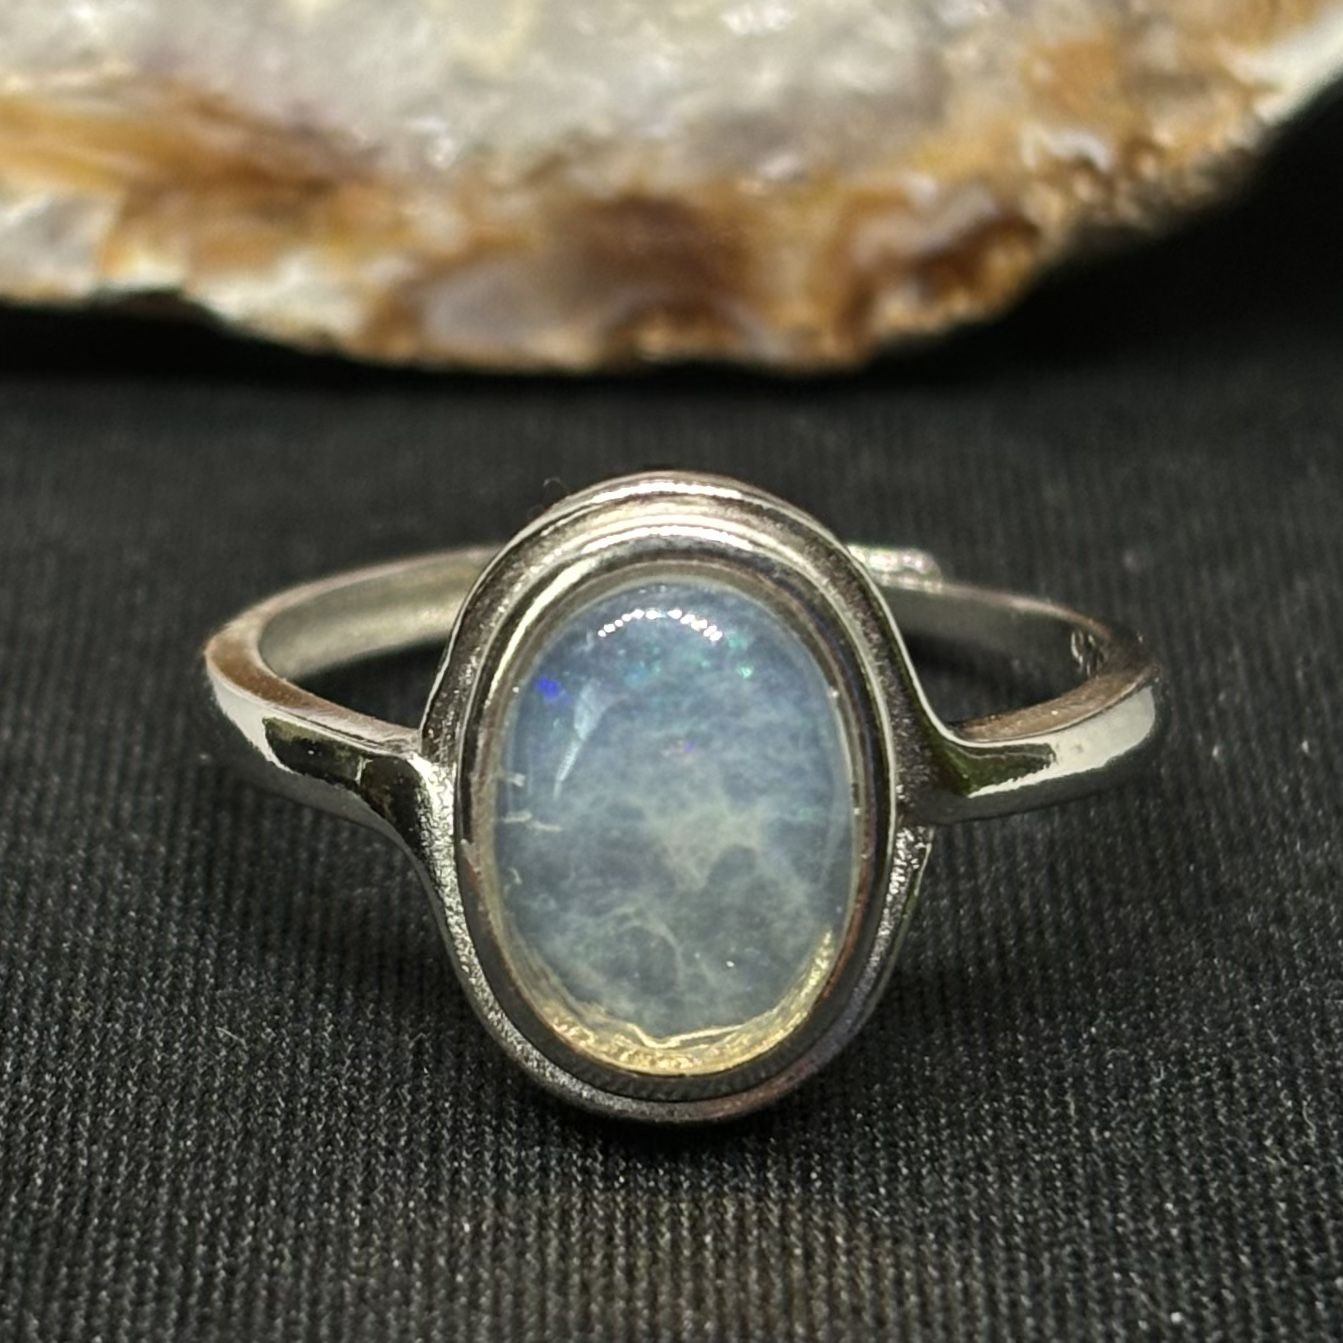 Pinfire Yowah Nut Opal Fashion Made .925 Sterling Silver Solitare Ring